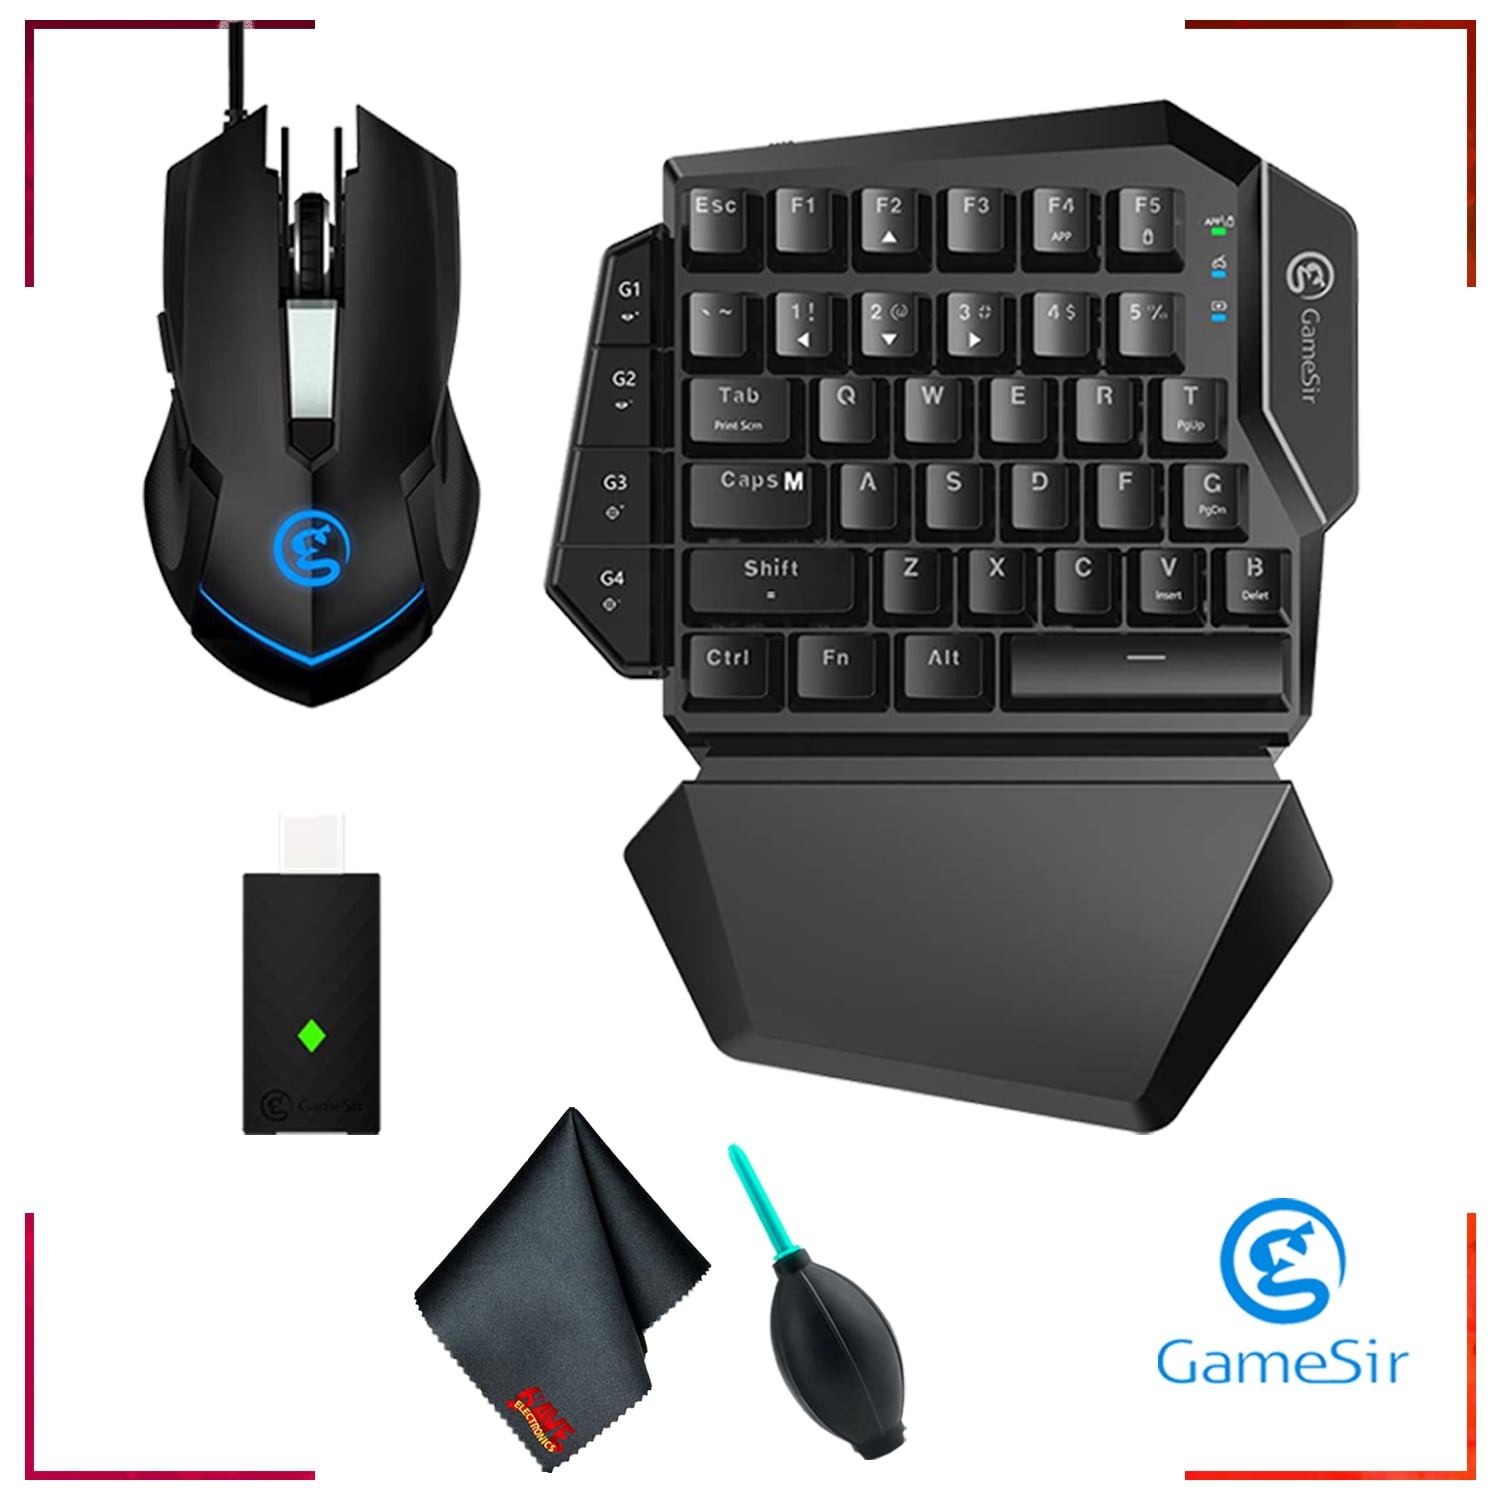 Gamesir Vx Aimswitch Keyboard And Mouse Adapter For Ps4 Xbox One Walmart Com